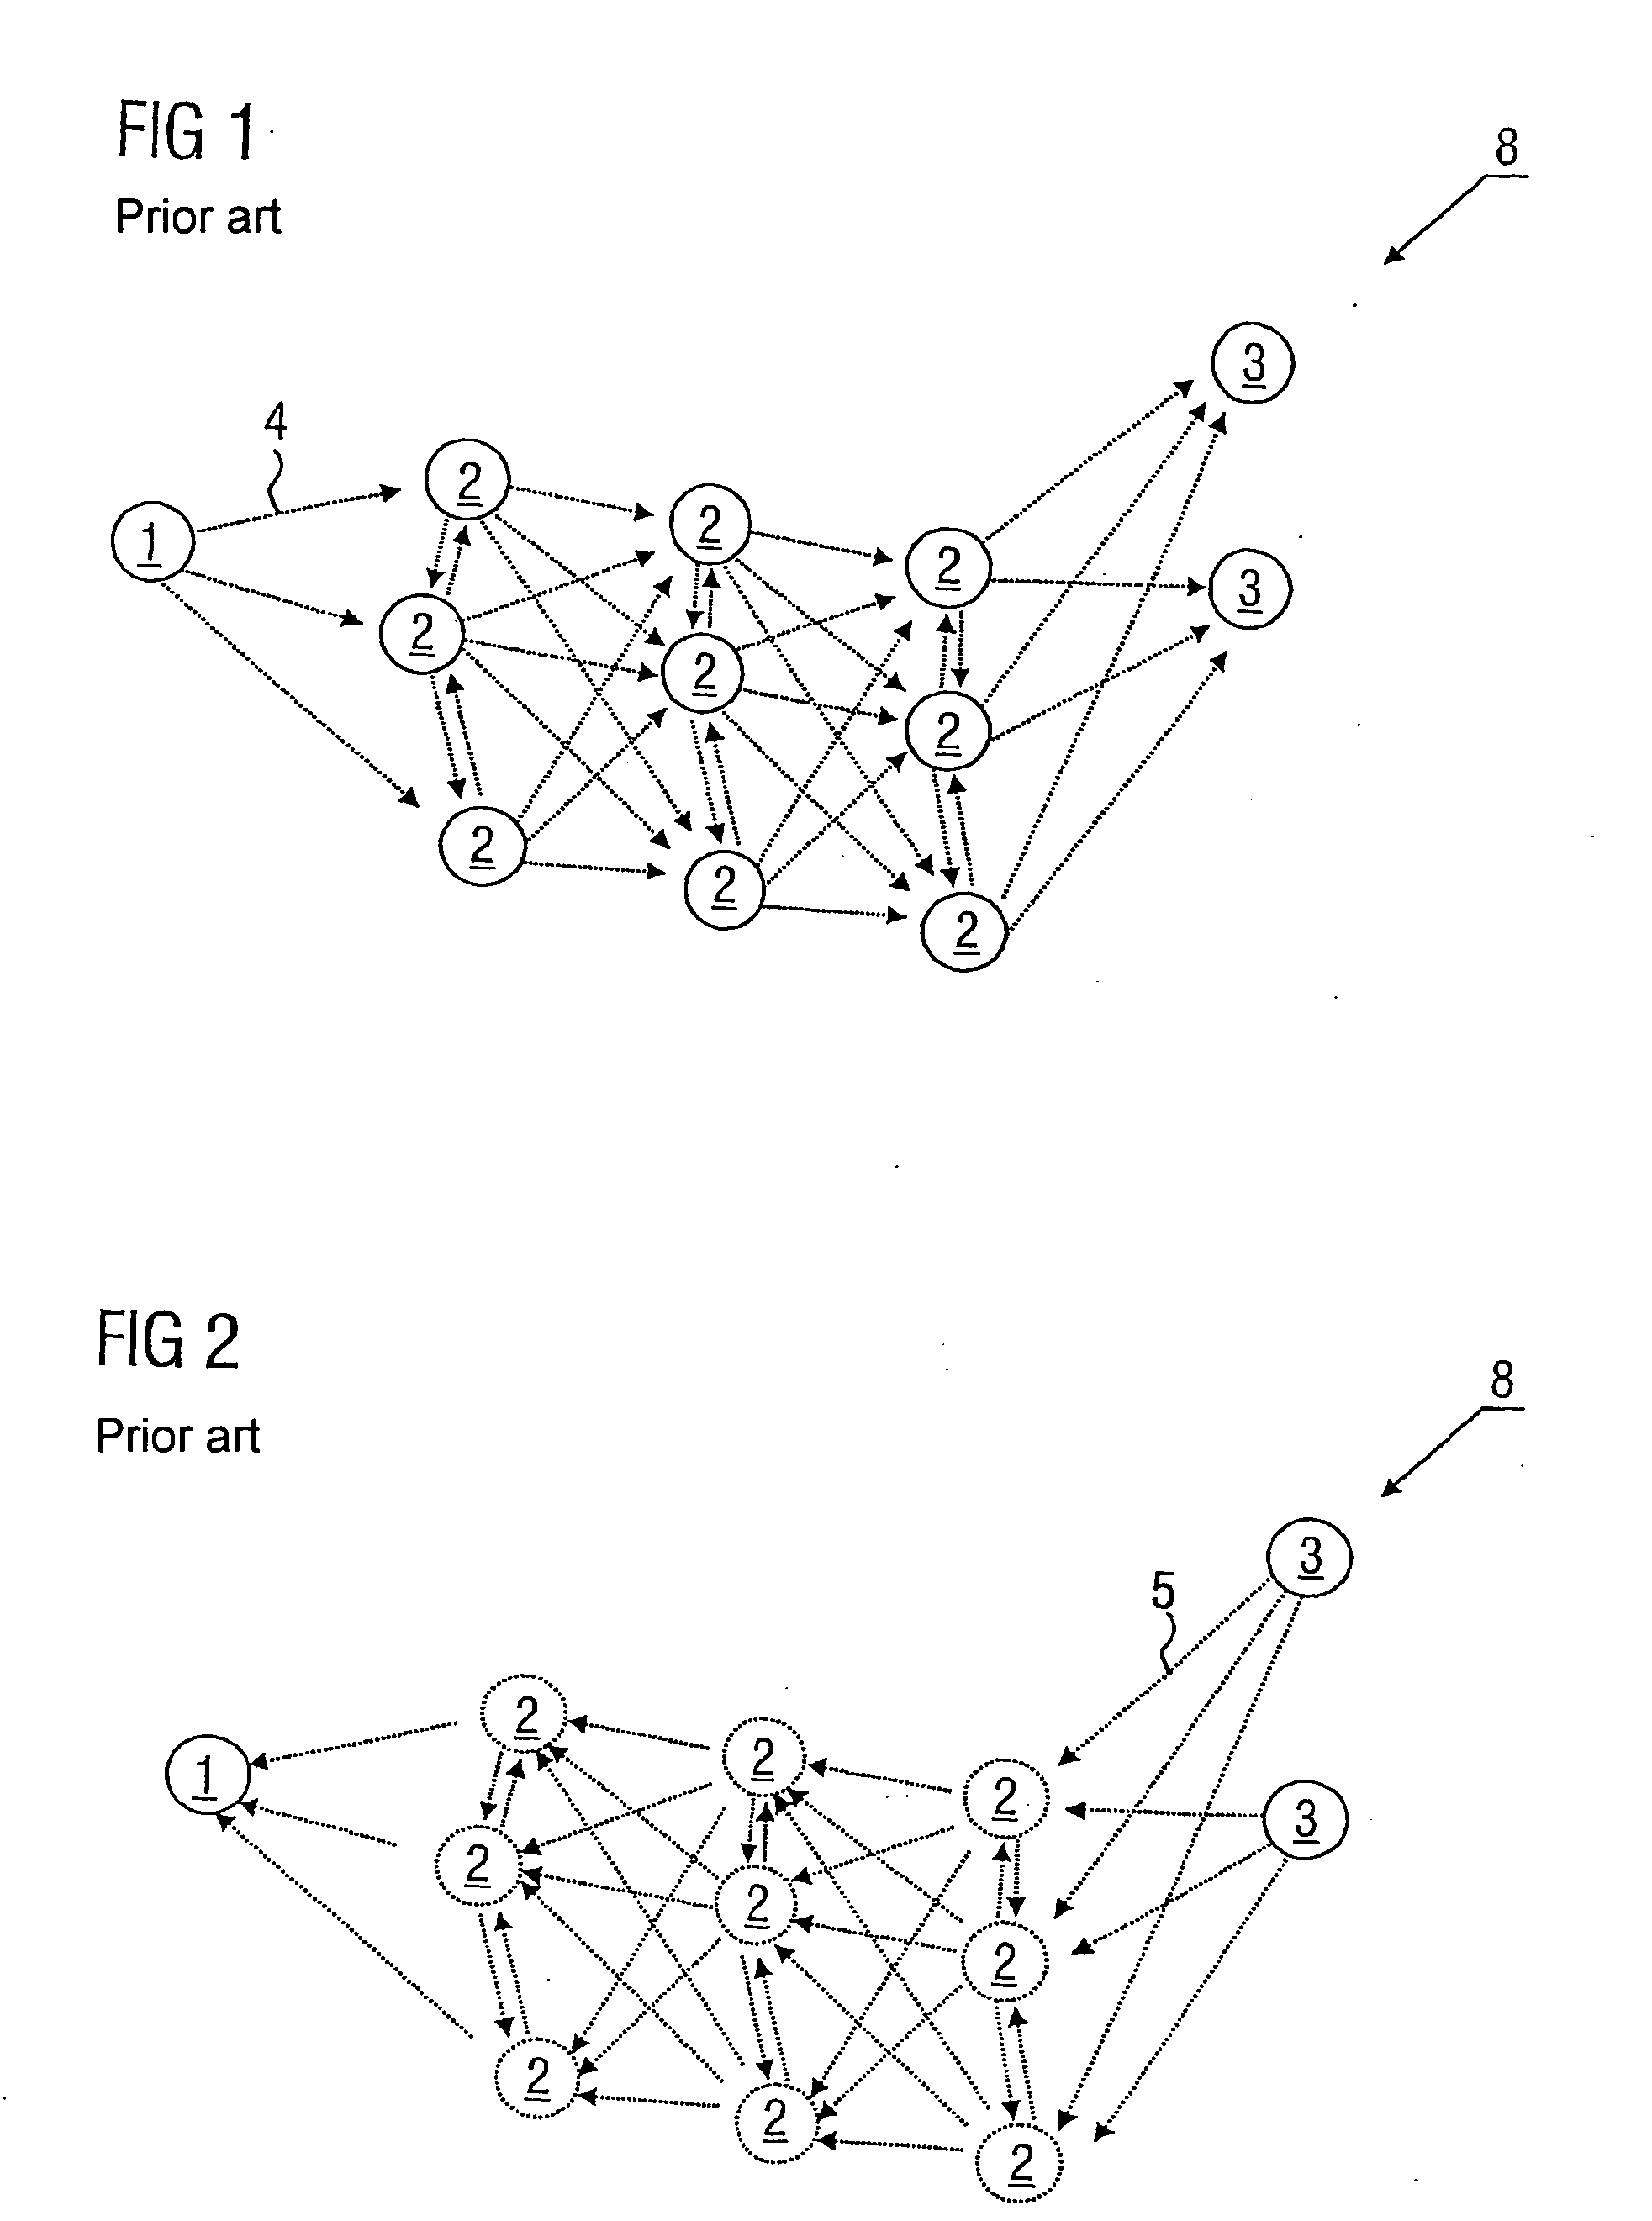 Method for establishing a connection between a service requester (client) and a service provider (server) in a decentralized mobile wireless network